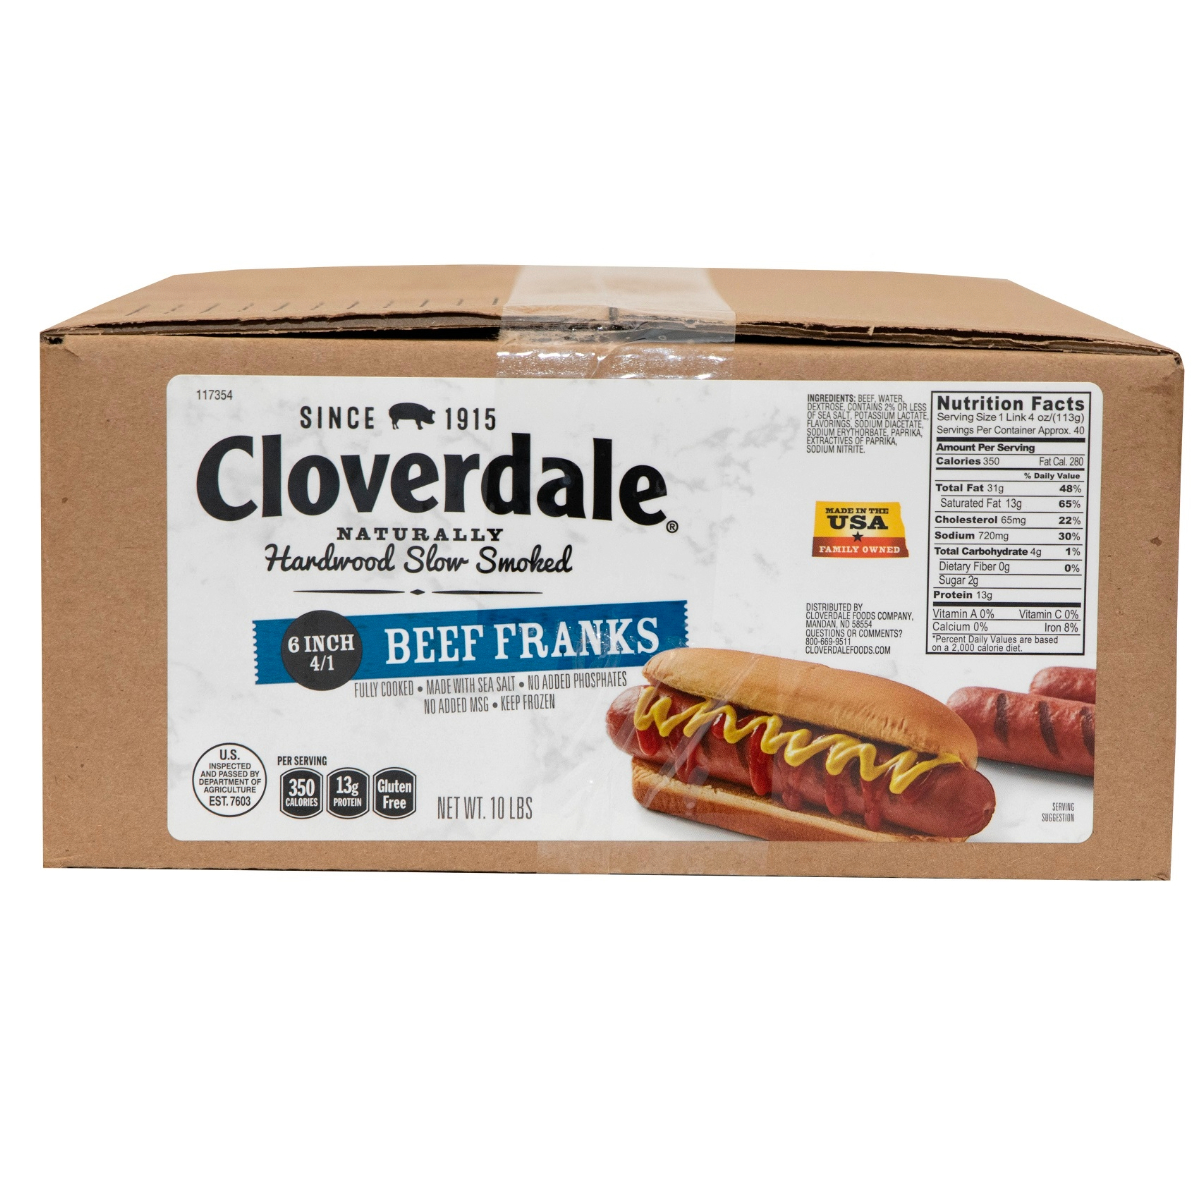 CLOVERDALE BEEF HOT DOGS 6 INCH 4/1 FRANKS